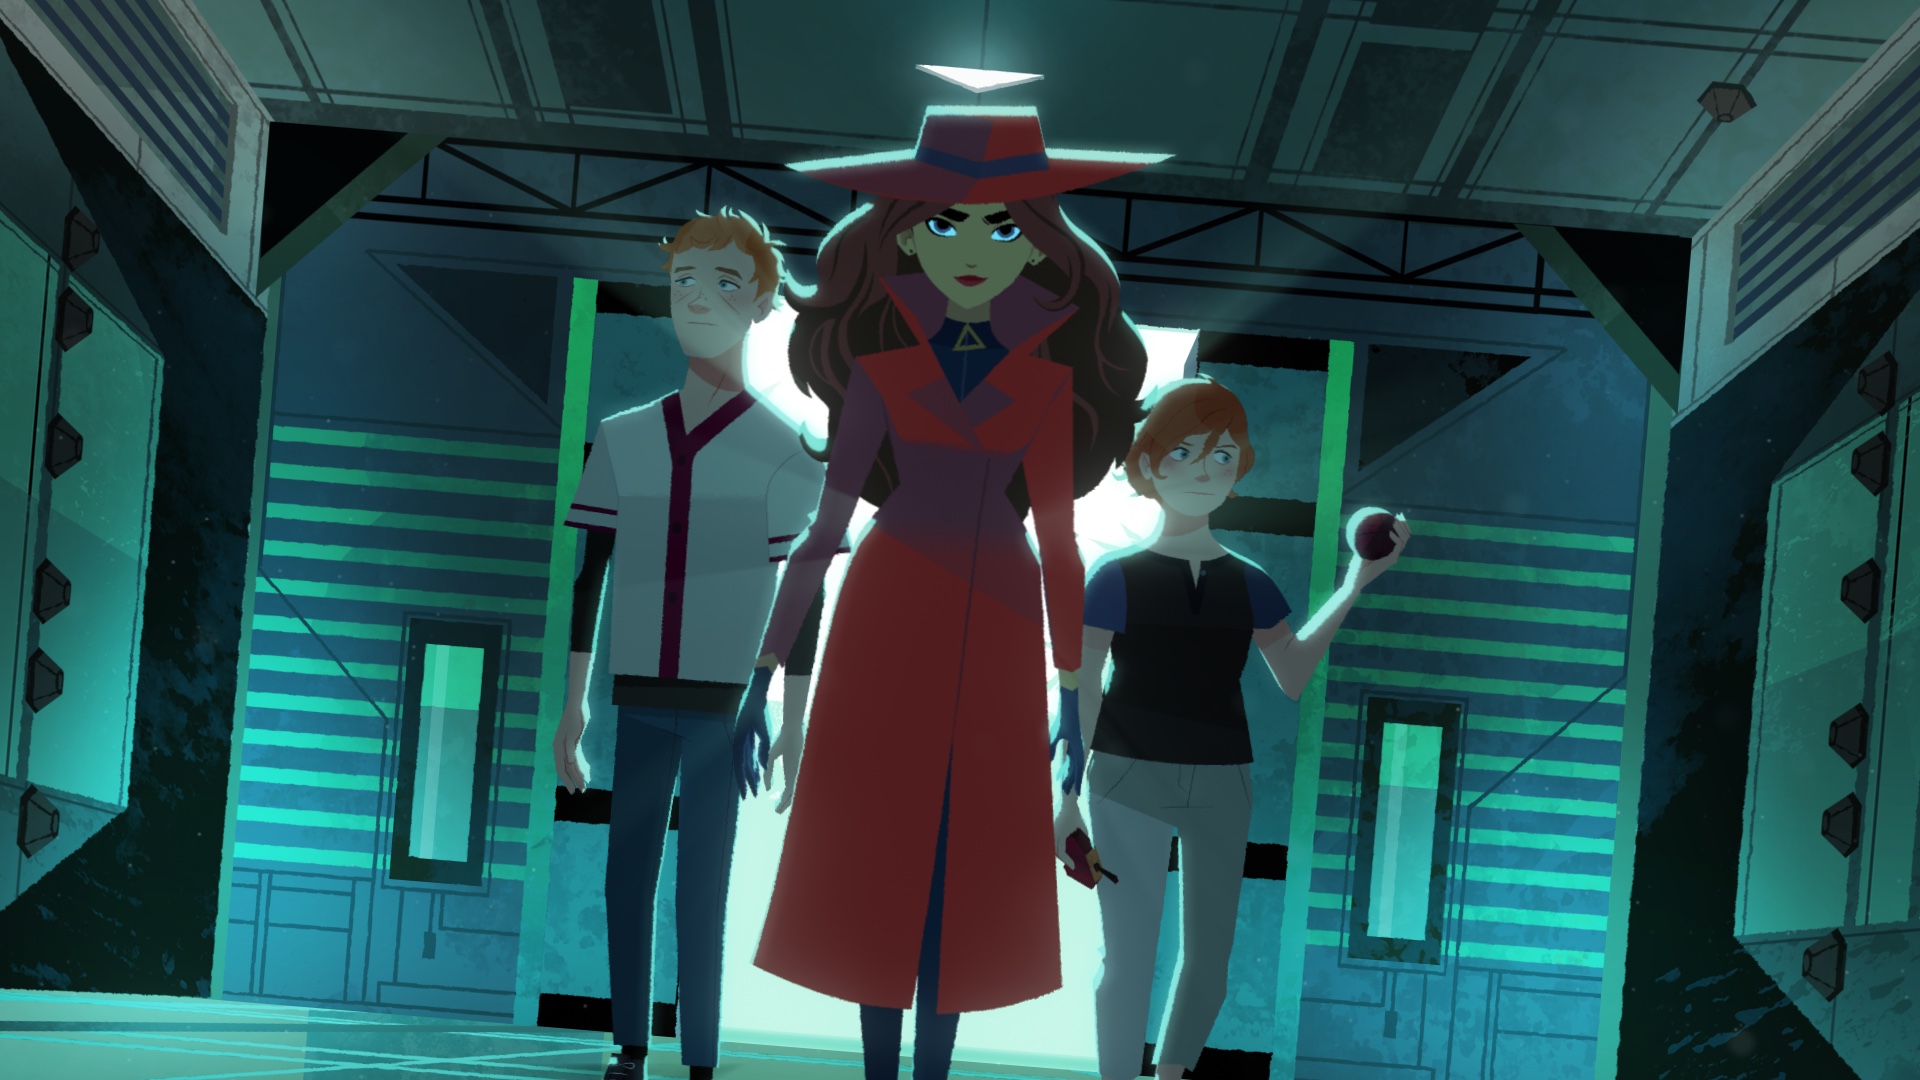 Flix S Carmen Sandiego Animated Series Gets A Poster Seven New